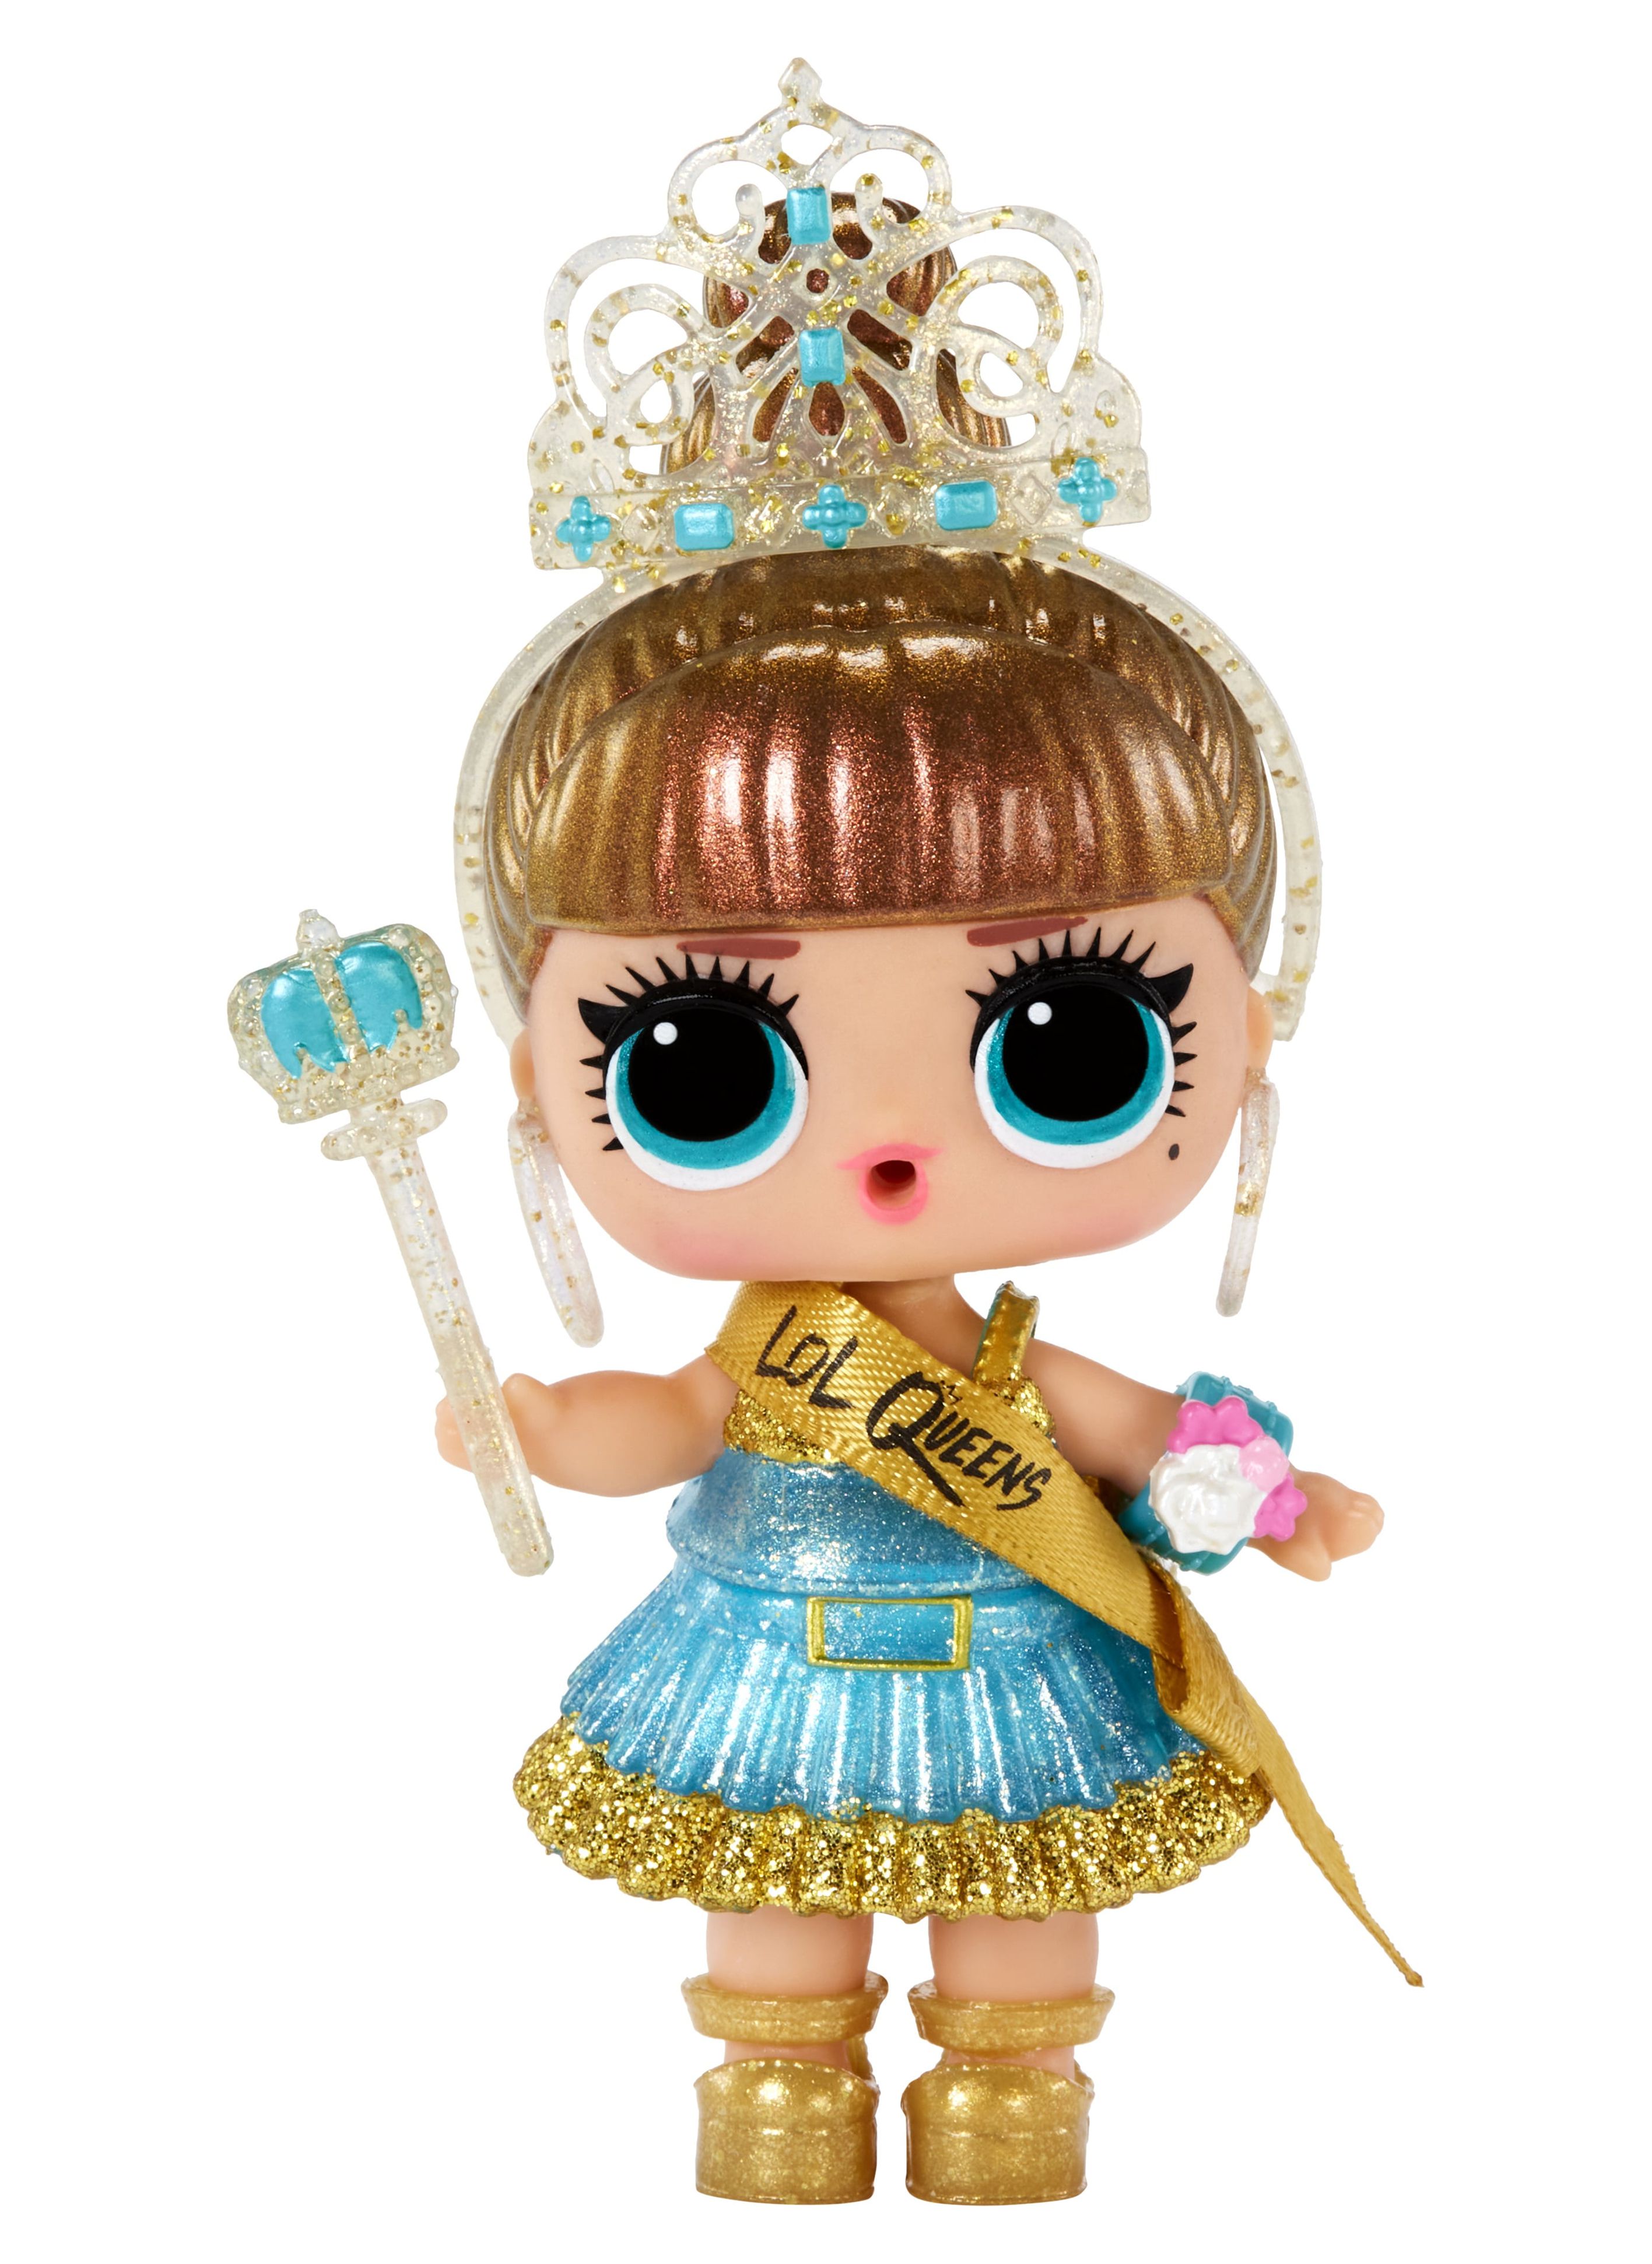 Lol Surprise Queens Dolls with 9 Surprises- Doll, Fashions, Royal Accessories